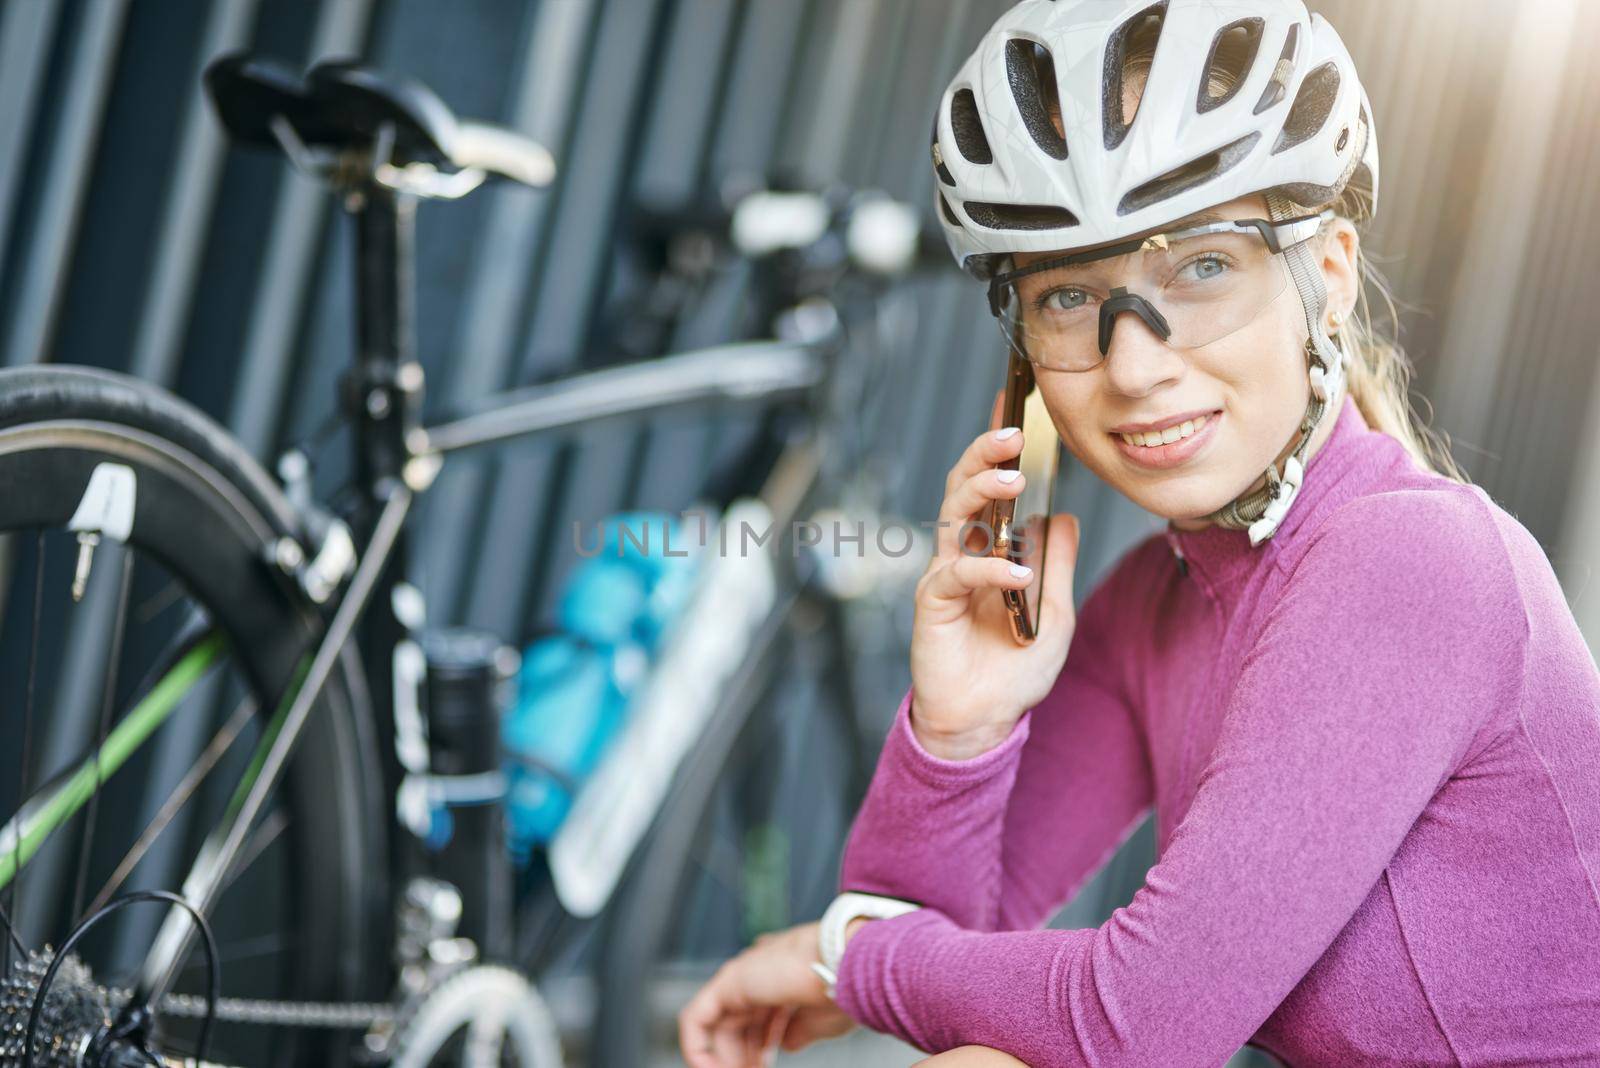 Portrait of attractive young sportive woman, female cyclist smiling, making a call using smartphone while checking her bike outdoors. Safety, sports, technology concept